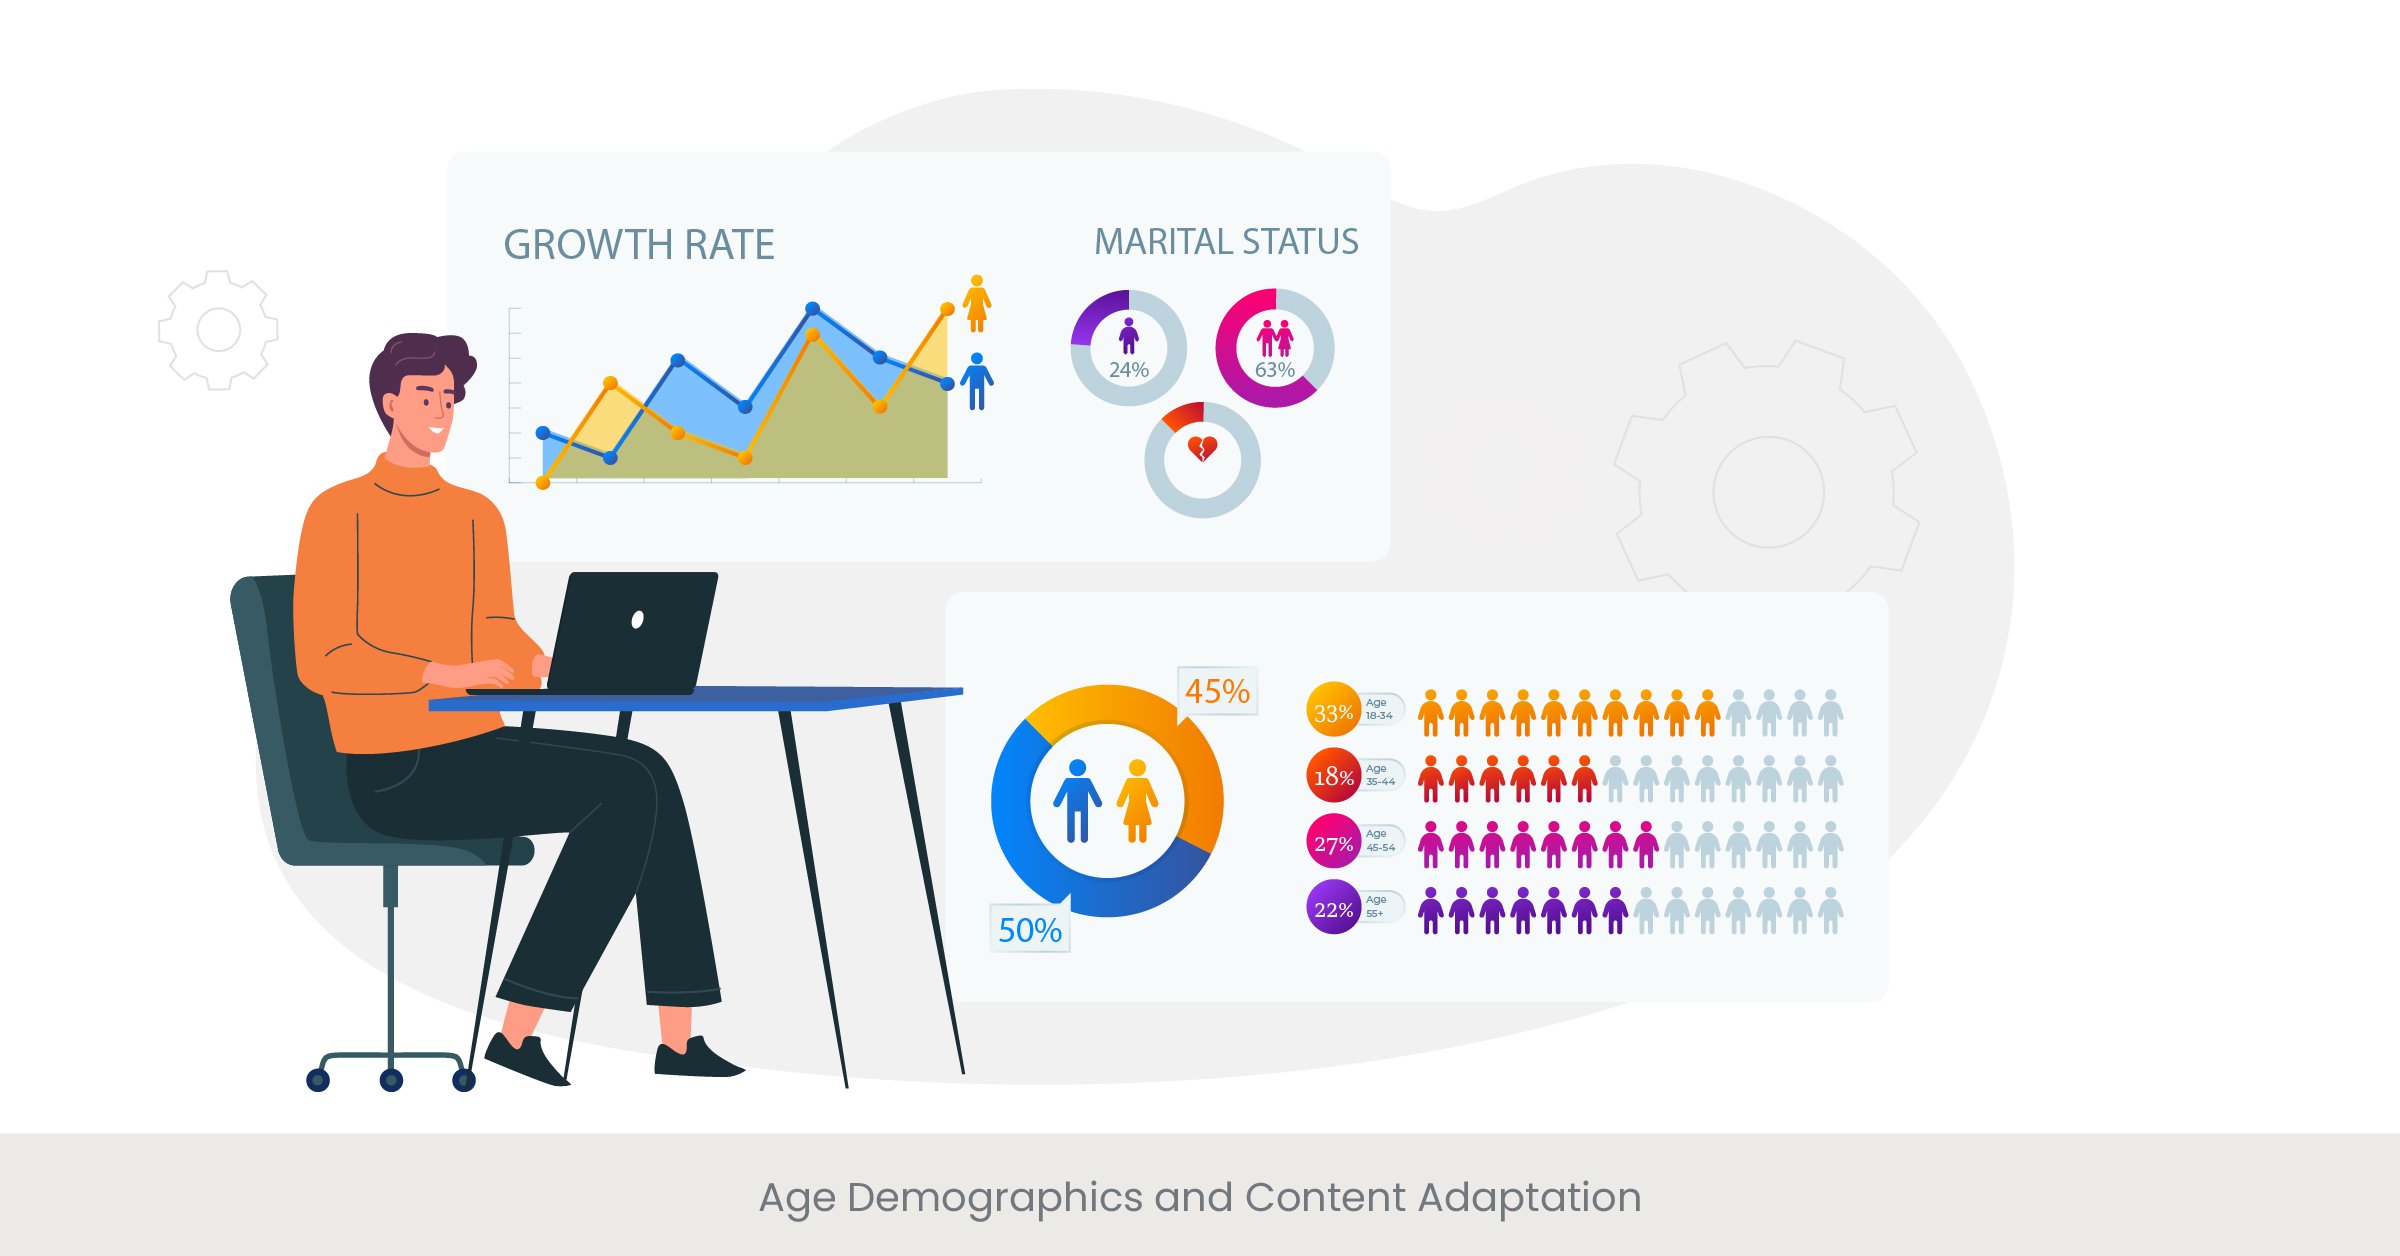 Age Demographics and Content Adaptation